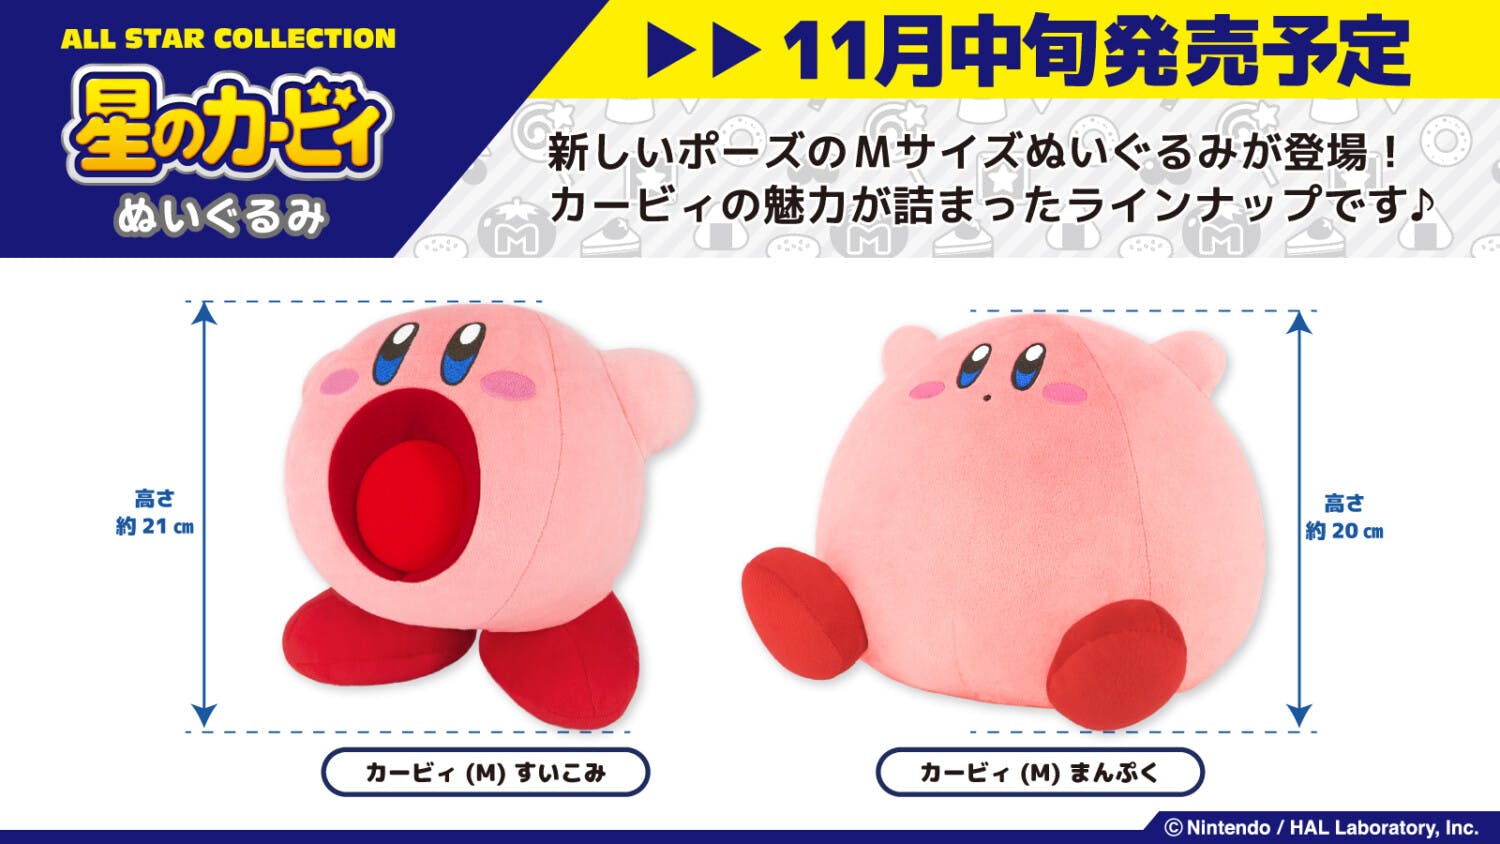 Cover Image for Two New All Star Collection Kirby Plushies Announced For Japan